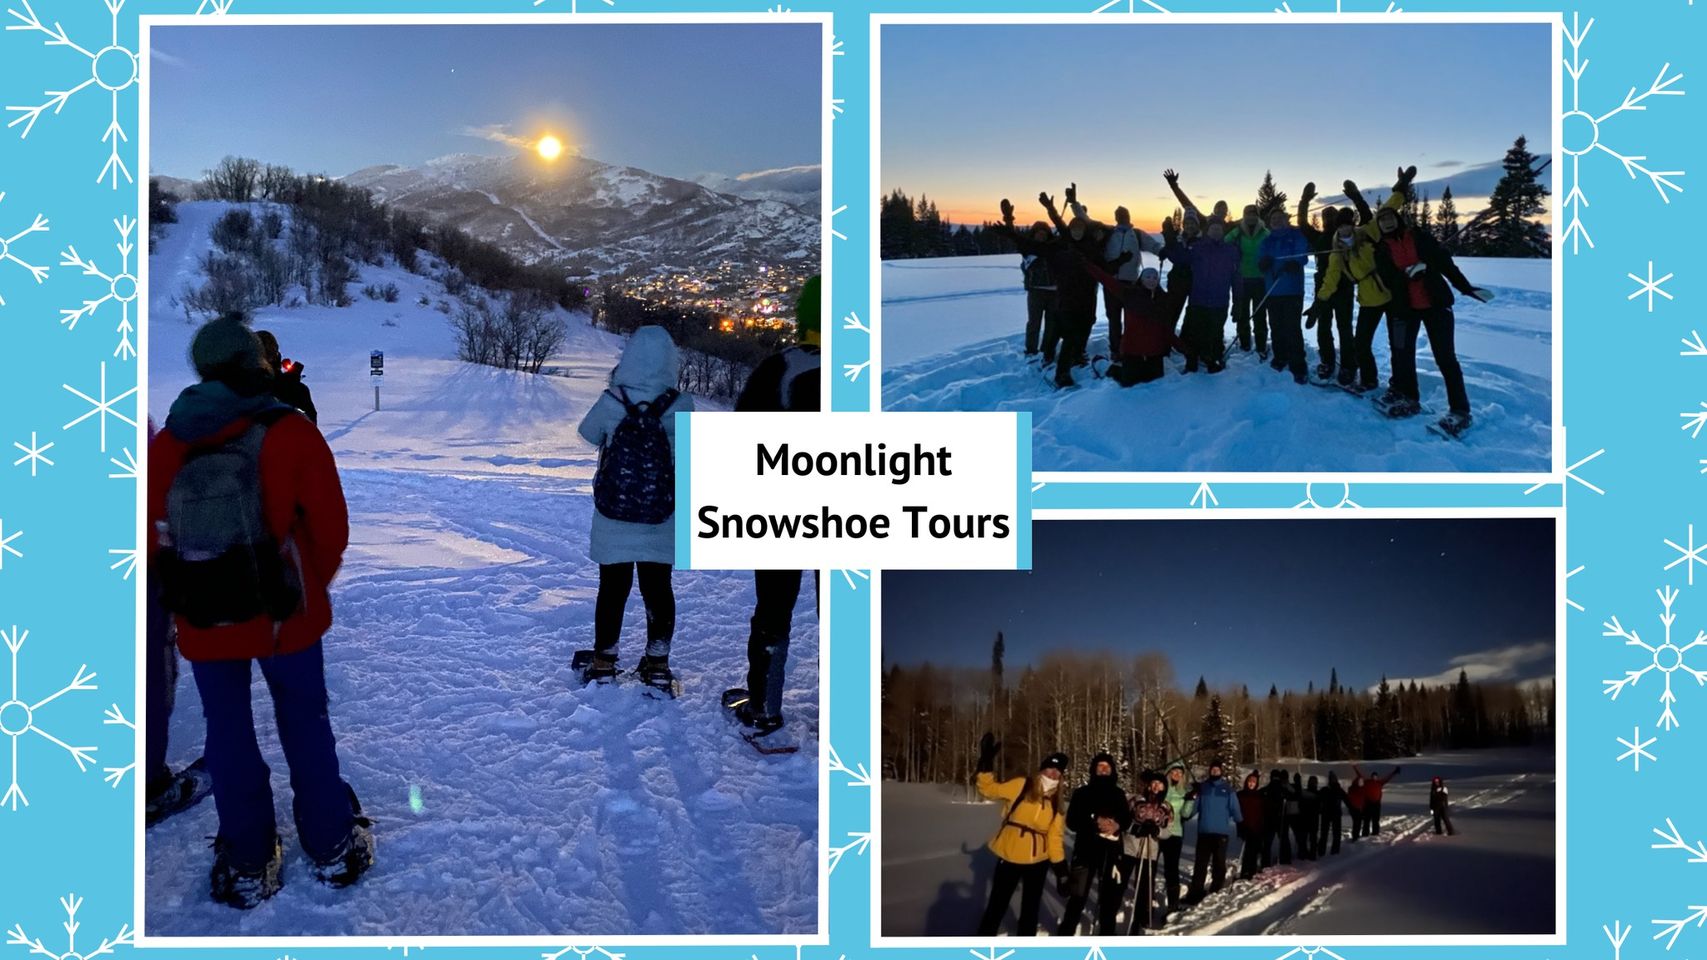 Moonlight Snowshoe Tours in the centre of three photos of people in the snow at night